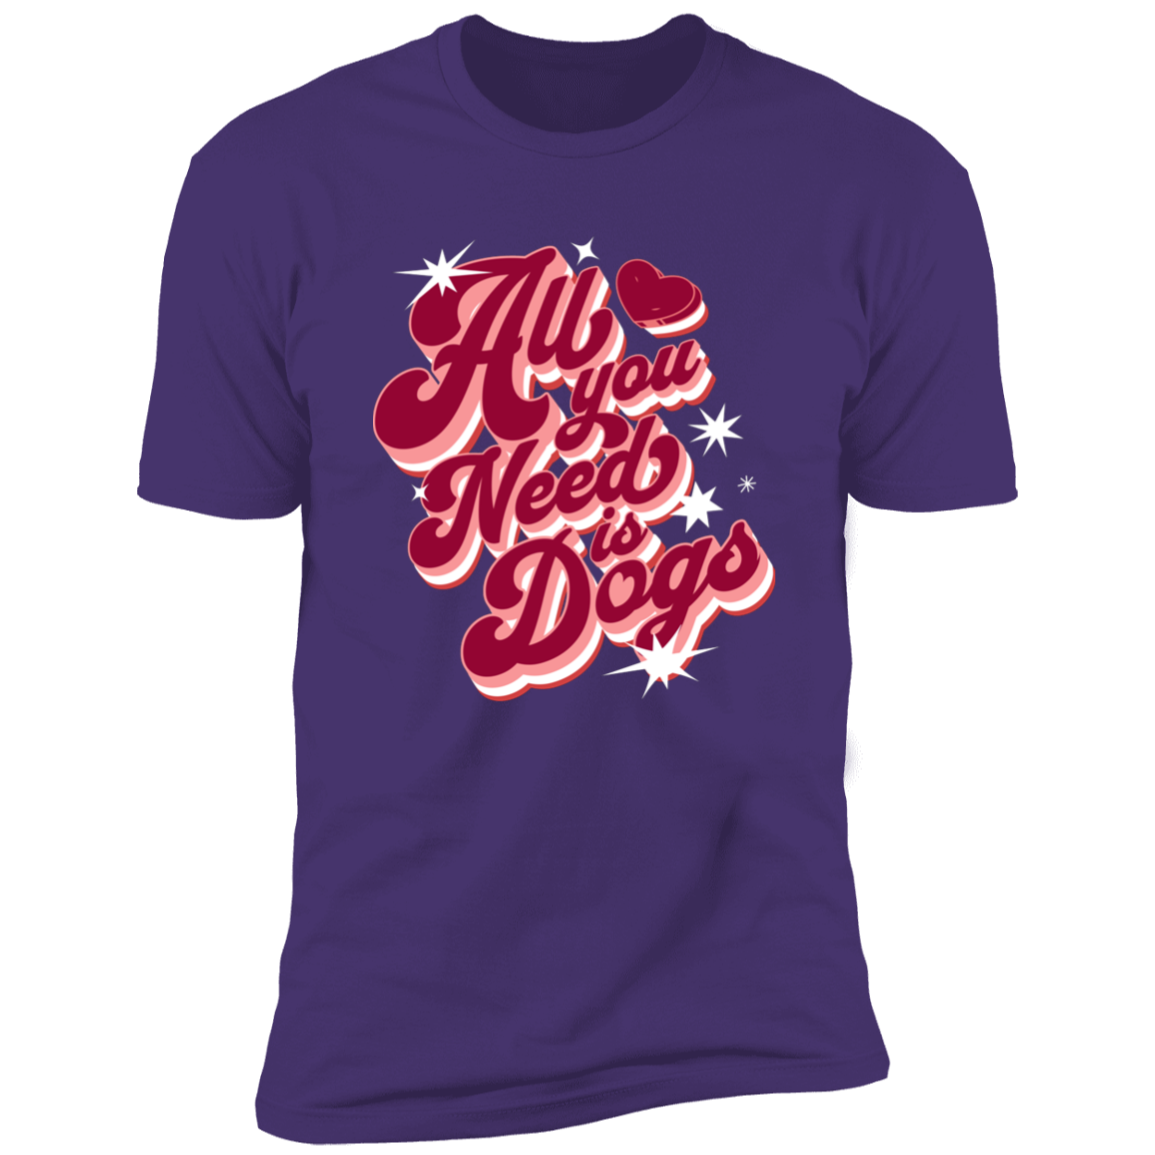 All I Need is Dogs T-shirt, Dog Shirt for humans, in purple rush